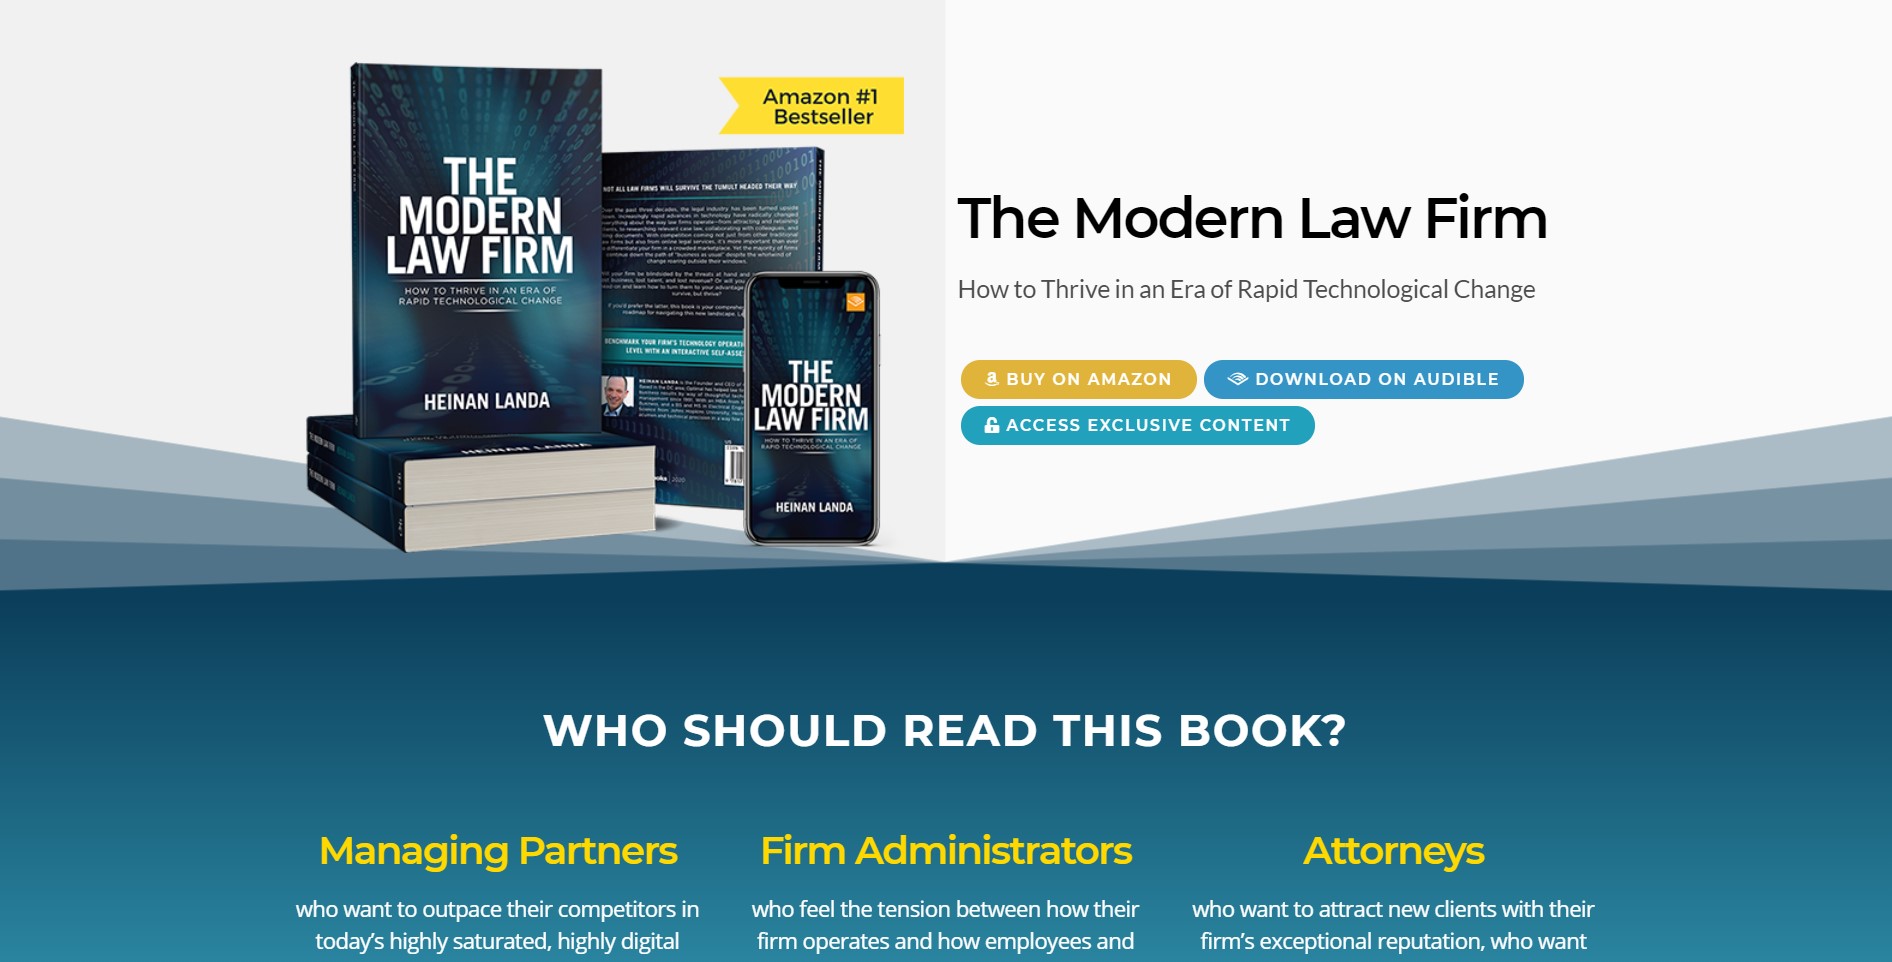 The Modern Law Firm